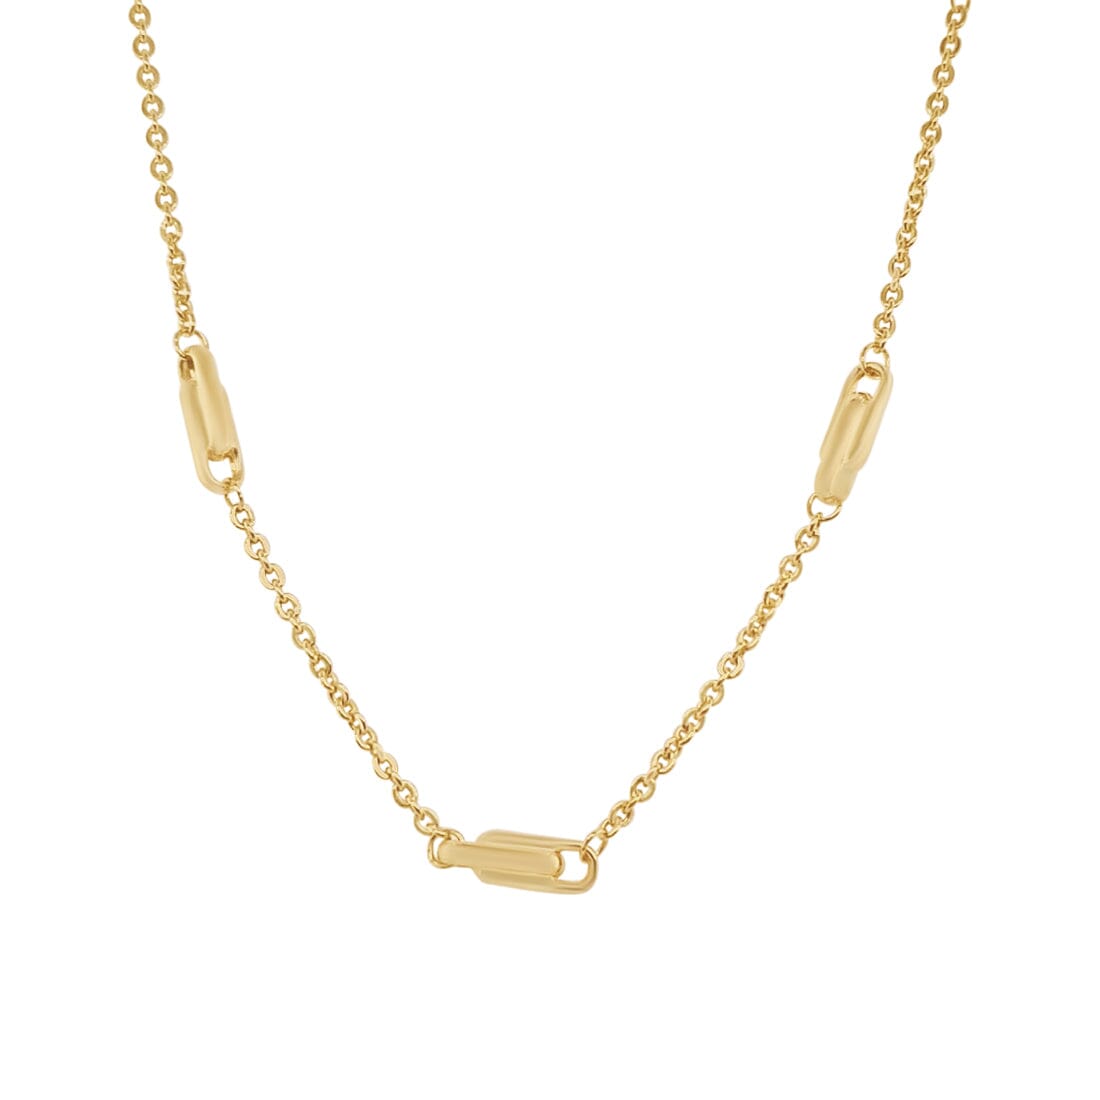 47cm 9ct Yellow Gold Silver Infused Necklace with Bars Necklaces Bevilles 